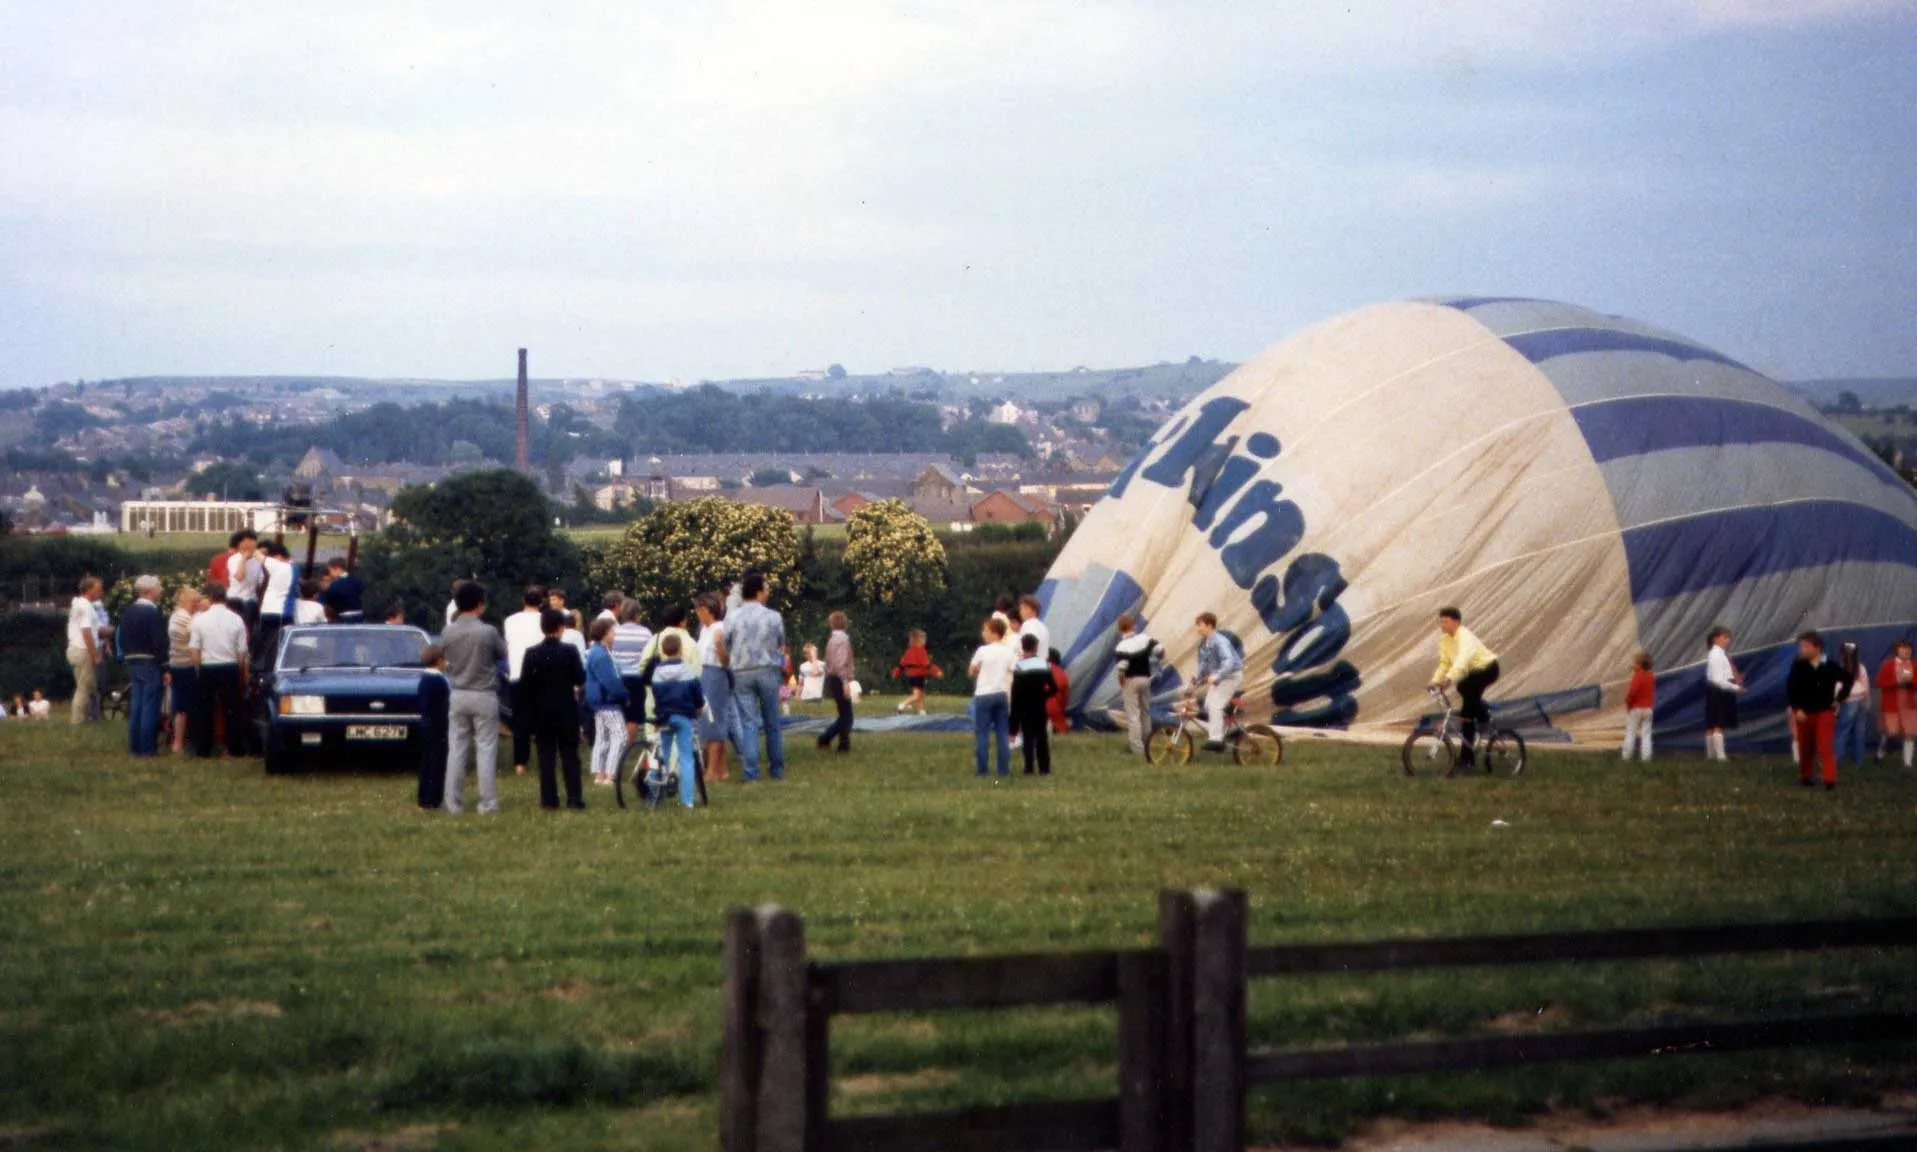 Photo showing: Hot Air Balloon lands infront of Wordsworth Close, Oswaldtwistle in 1988. White Ash field and central Oswaldtwistle can be seen in the background.
Author: Caroline Sparkes
Location: Oswaldtwistle

Source: Personal photograph taken by Author